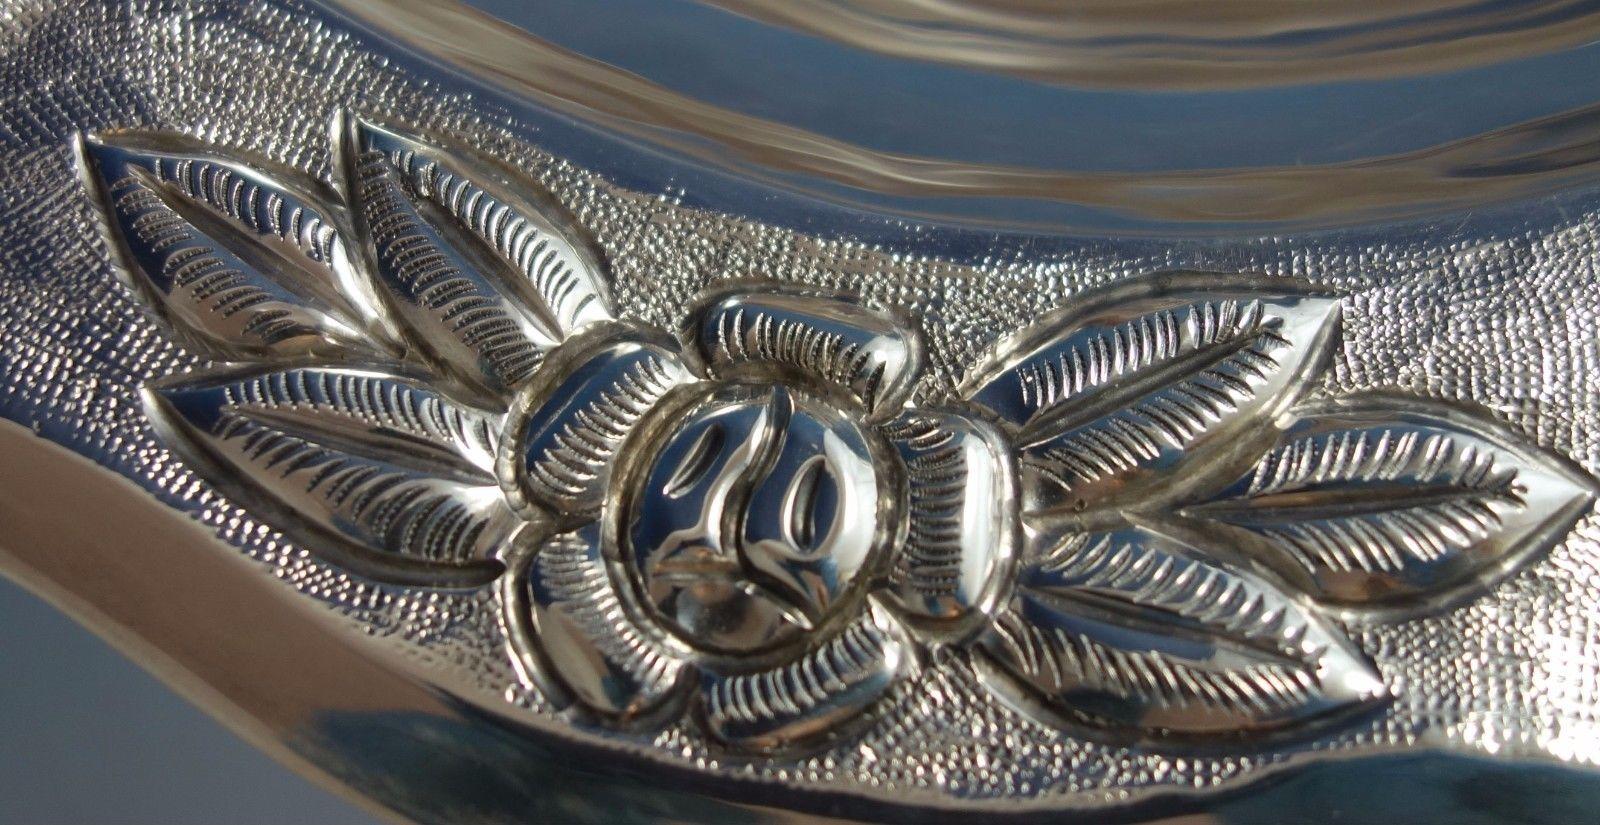 Aztec Rose by Maciel
Stunning Aztec Rose by Maciel sterling silver fruit bowl. This dish is not monogrammed and features a beautiful border of flowers. It is marked Maciel #6522 and #5. This piece measures 1 3/4